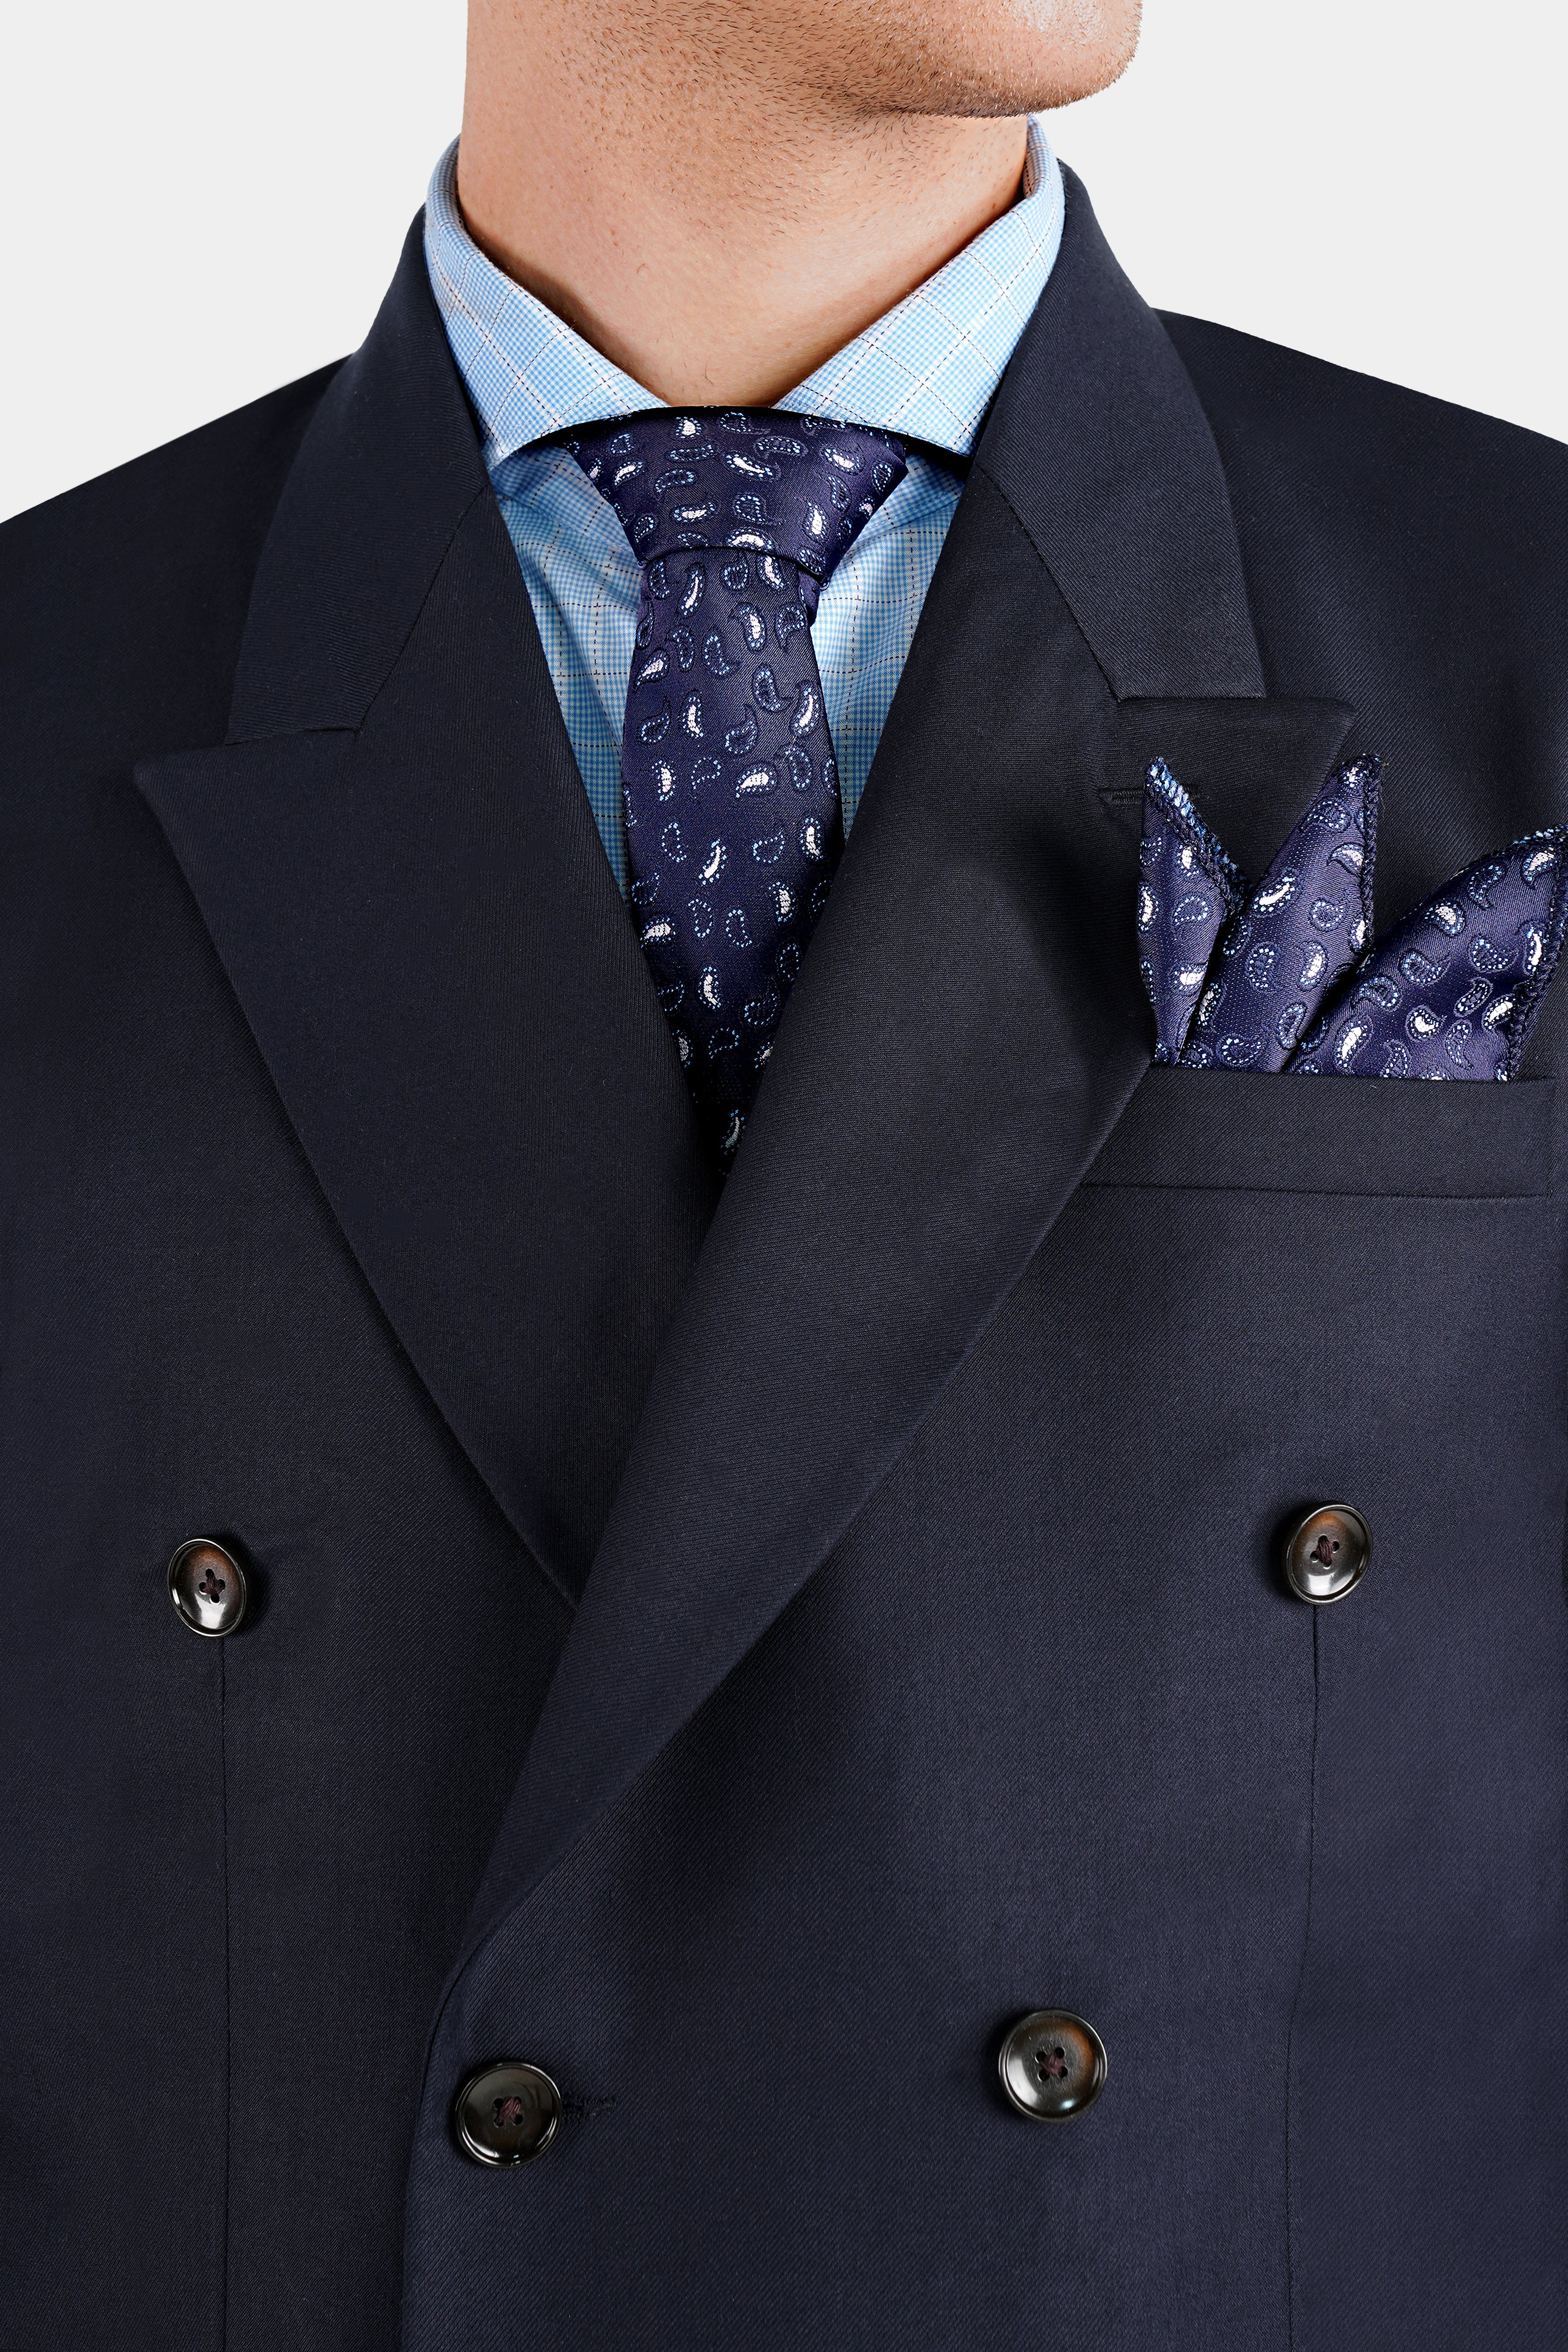 Mirage Blue Wool Rich Double Breasted Suit ST2727-DB-36, ST2727-DB-38, ST2727-DB-40, ST2727-DB-42, ST2727-DB-44, ST2727-DB-46, ST2727-DB-48, ST2727-DB-50, ST2727-DB-52, ST2727-DB-54, ST2727-DB-56, ST2727-DB-58, ST2727-DB-60